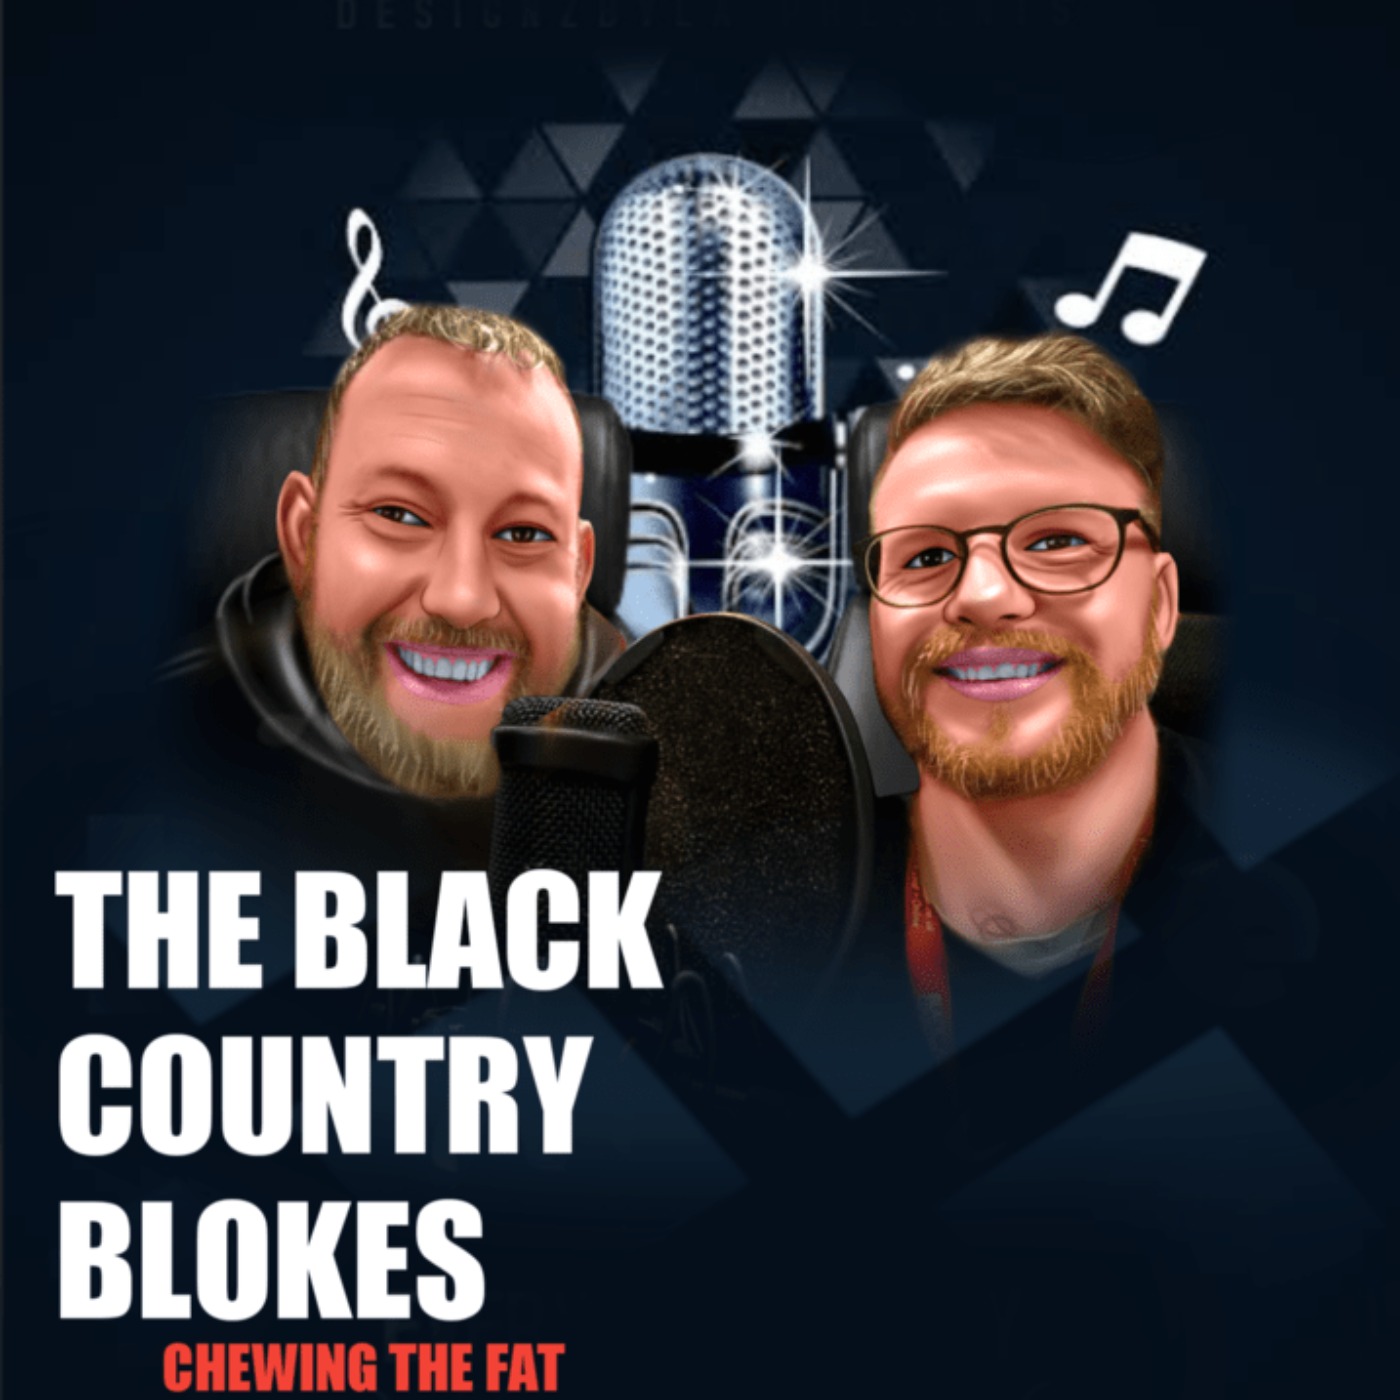 From Breakdown to Breakthrough: Finding Hope After Mental Health Challenges | The Black Country Blokes #MentalHealth #Podcast